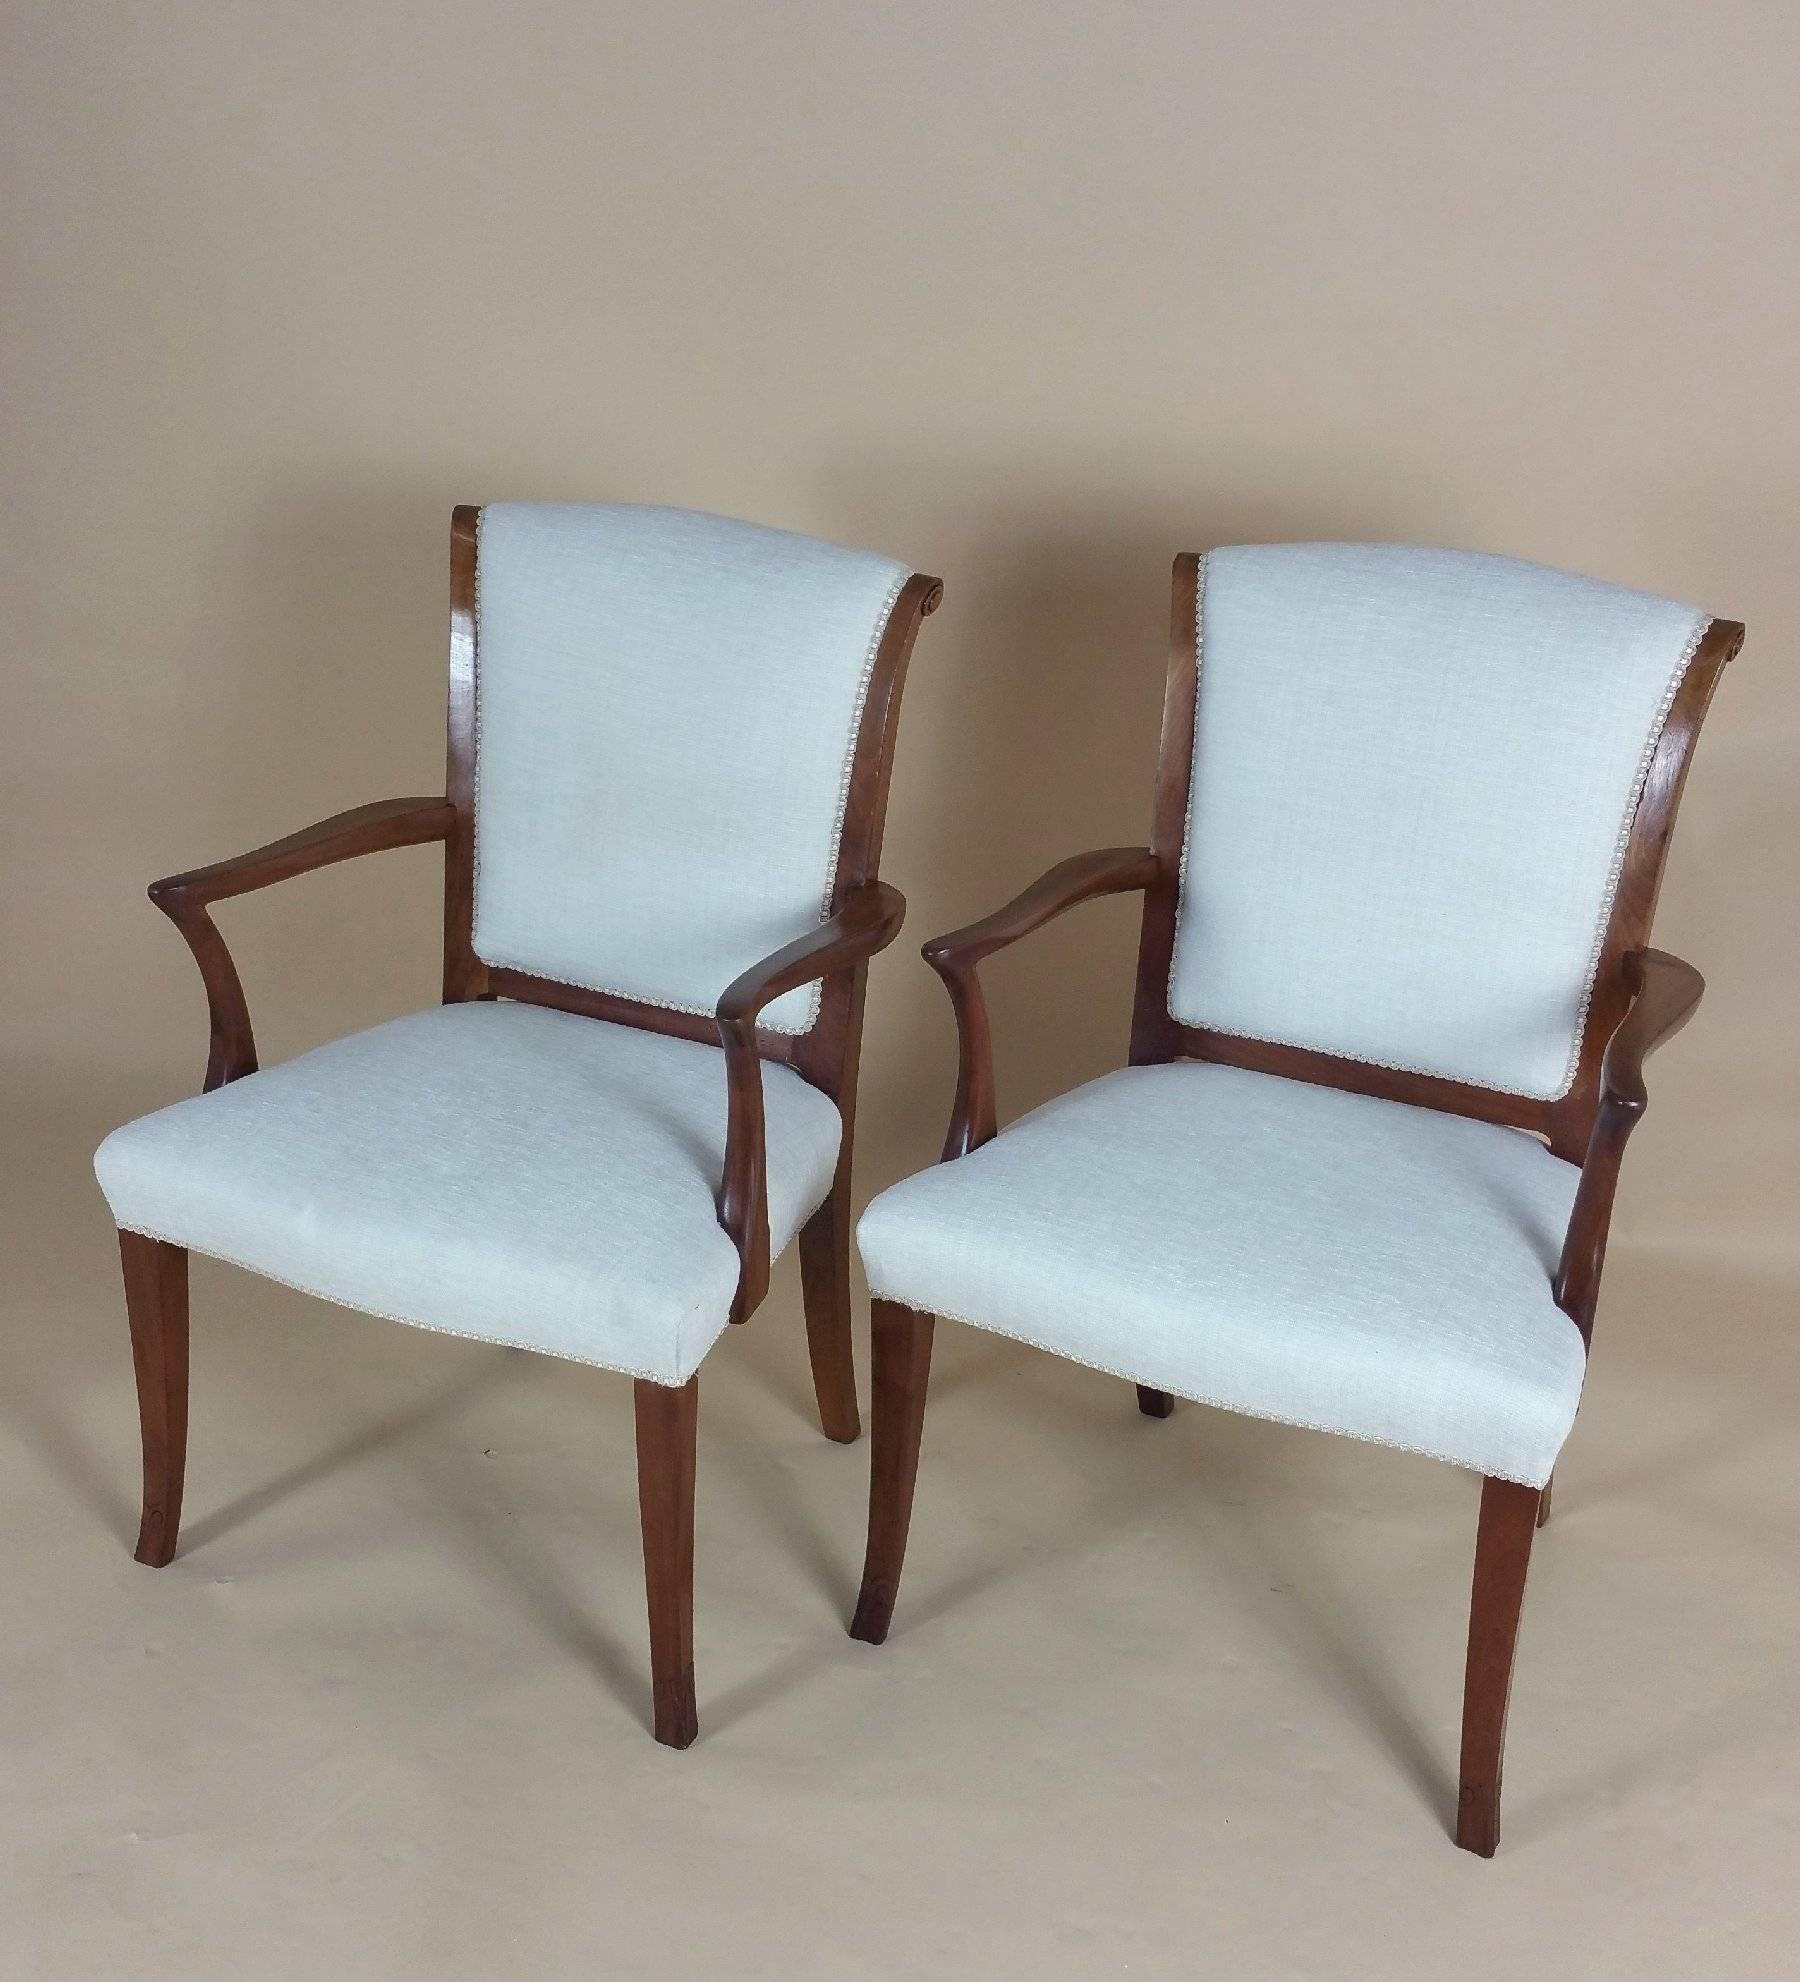 English Set of Six Early 20th Century Teak Elbow Chairs